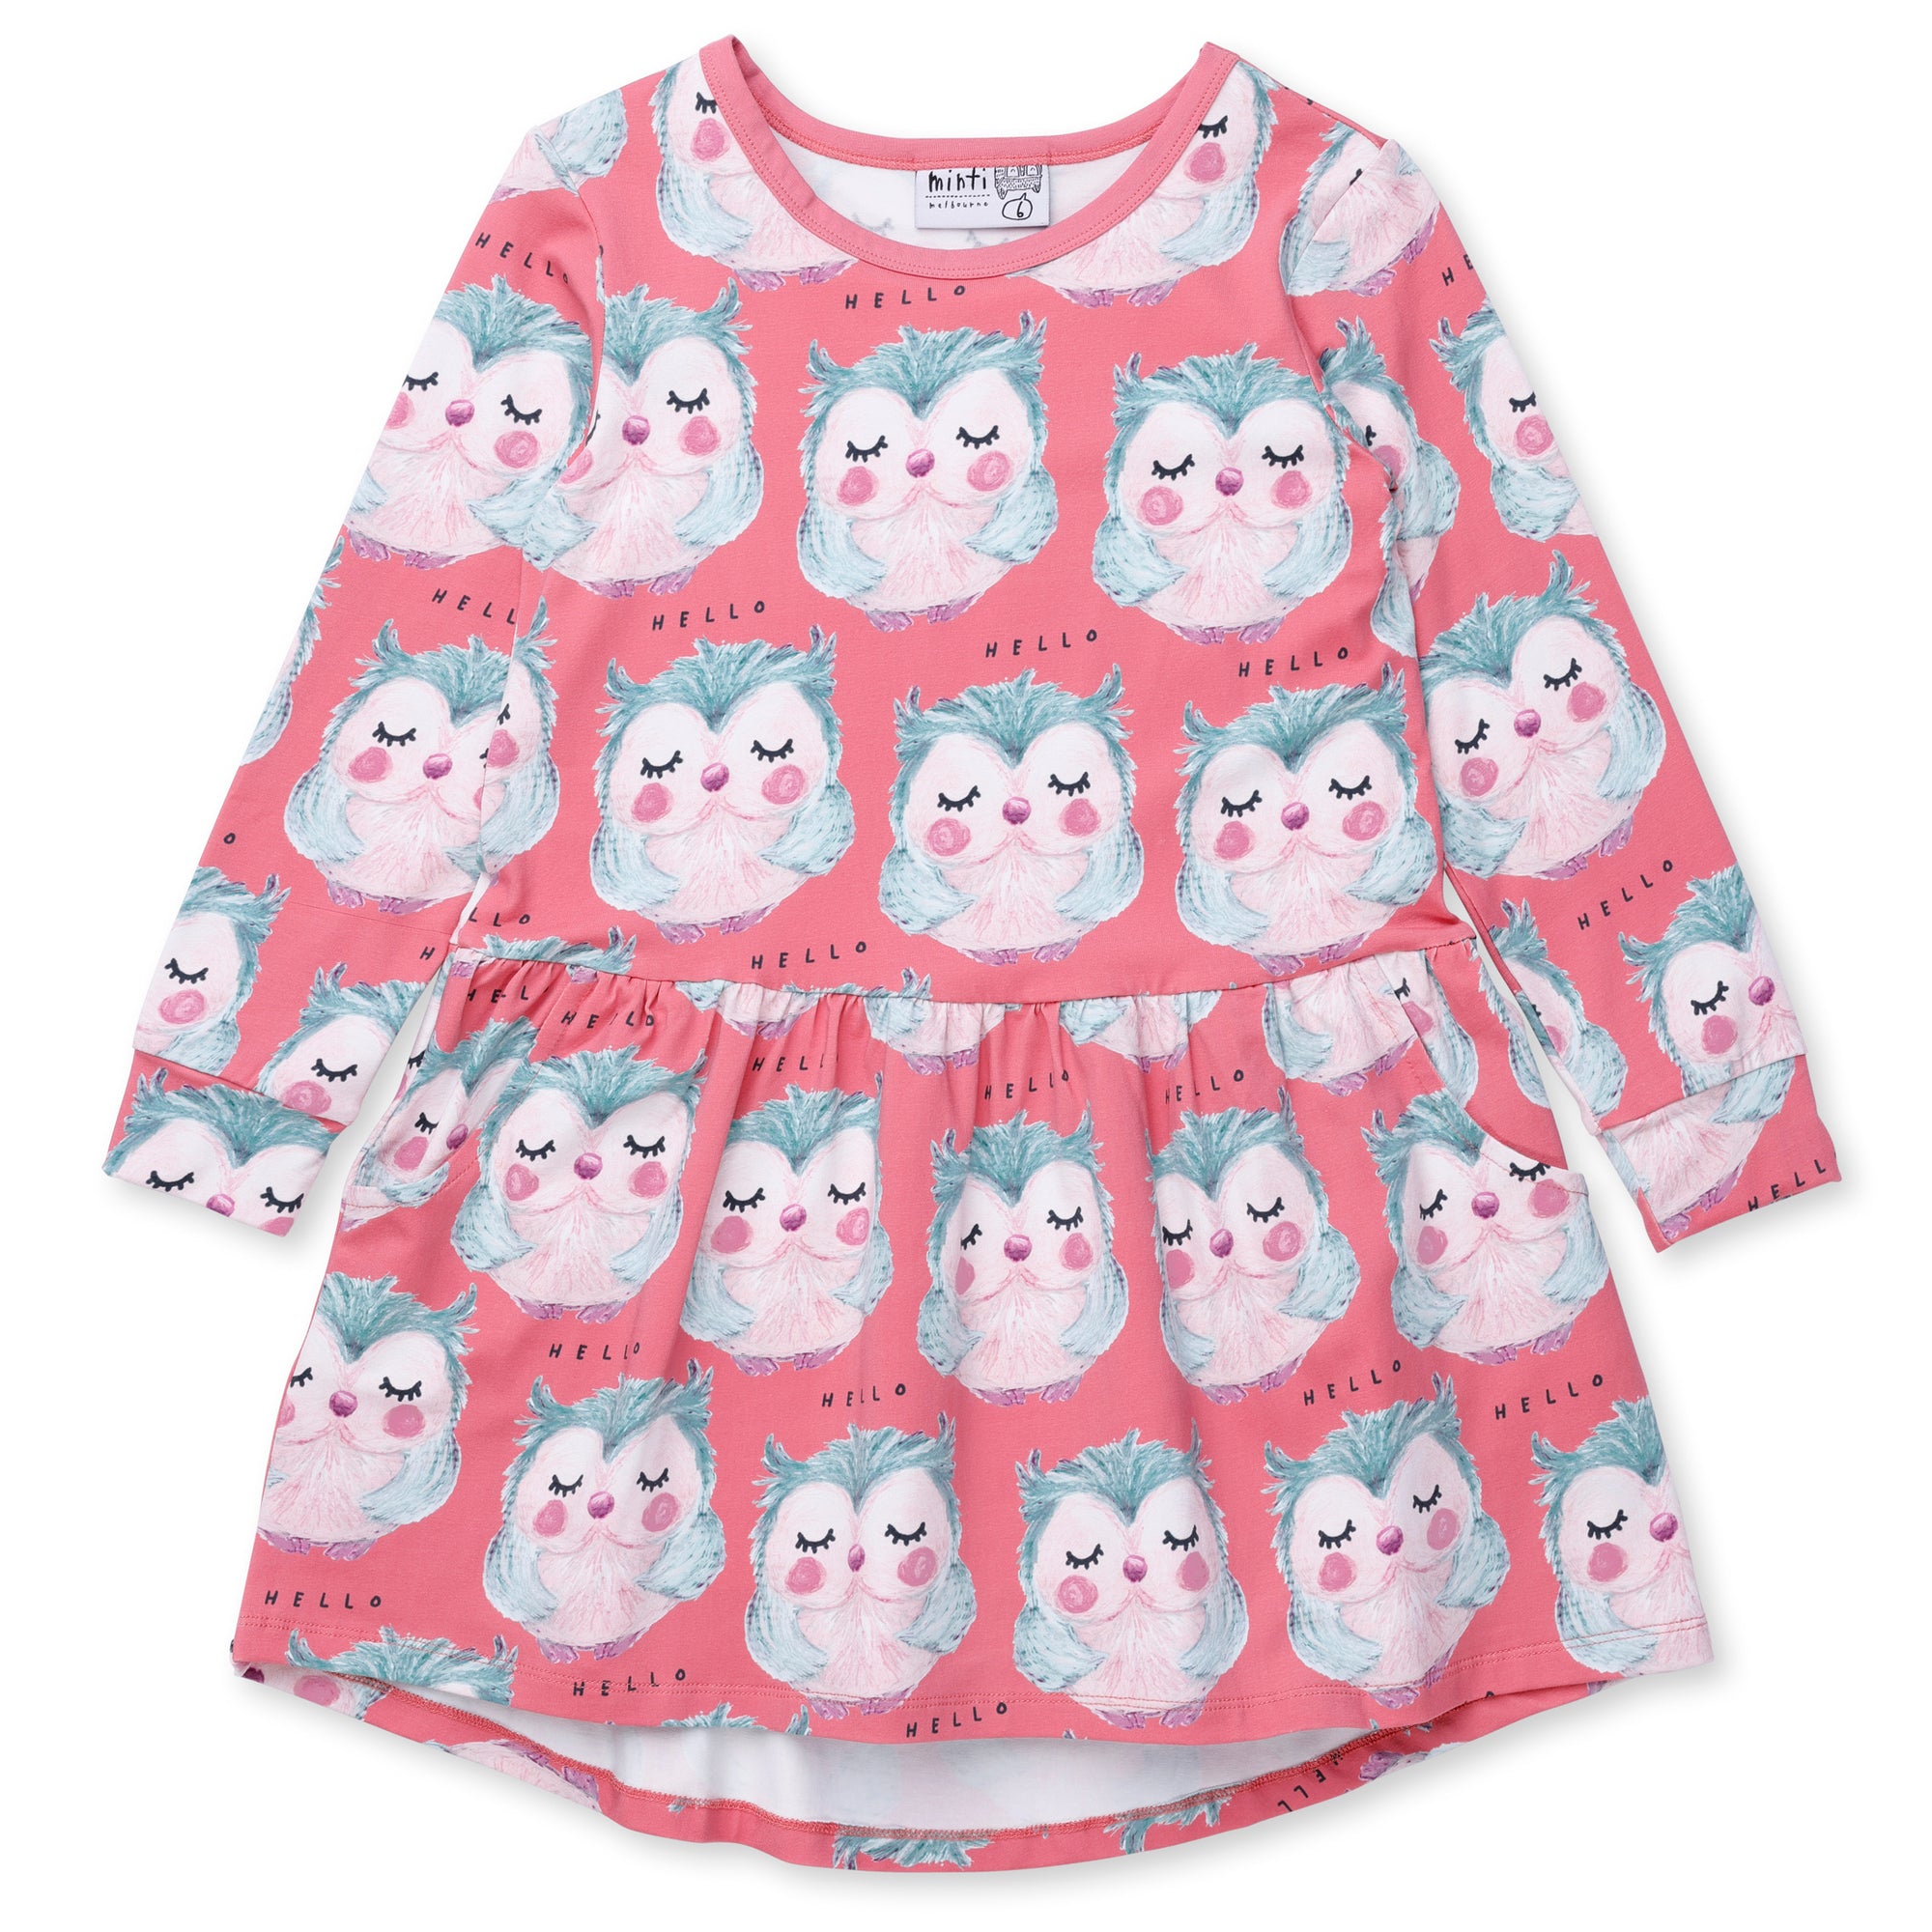 Painted Owls Dress